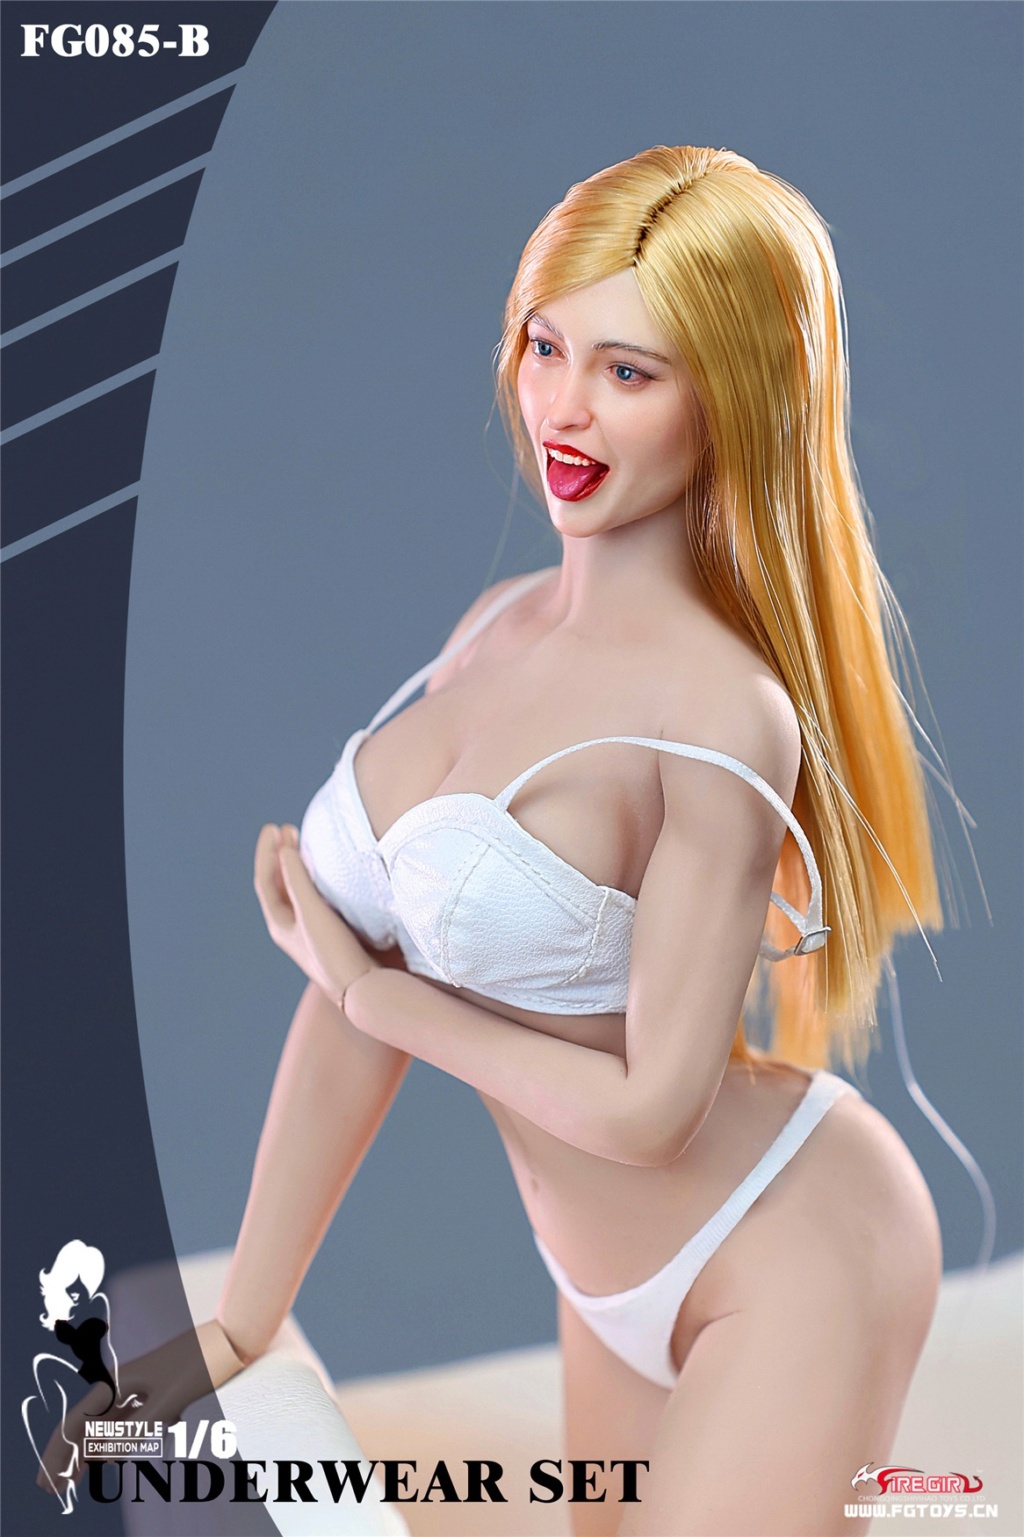 underwear - NEW PRODUCT: Fire Girl Toys: 1/6 FG085 Wardrobe Collection Female Underwear Set (Three Colors) NSFW 0cc1c510